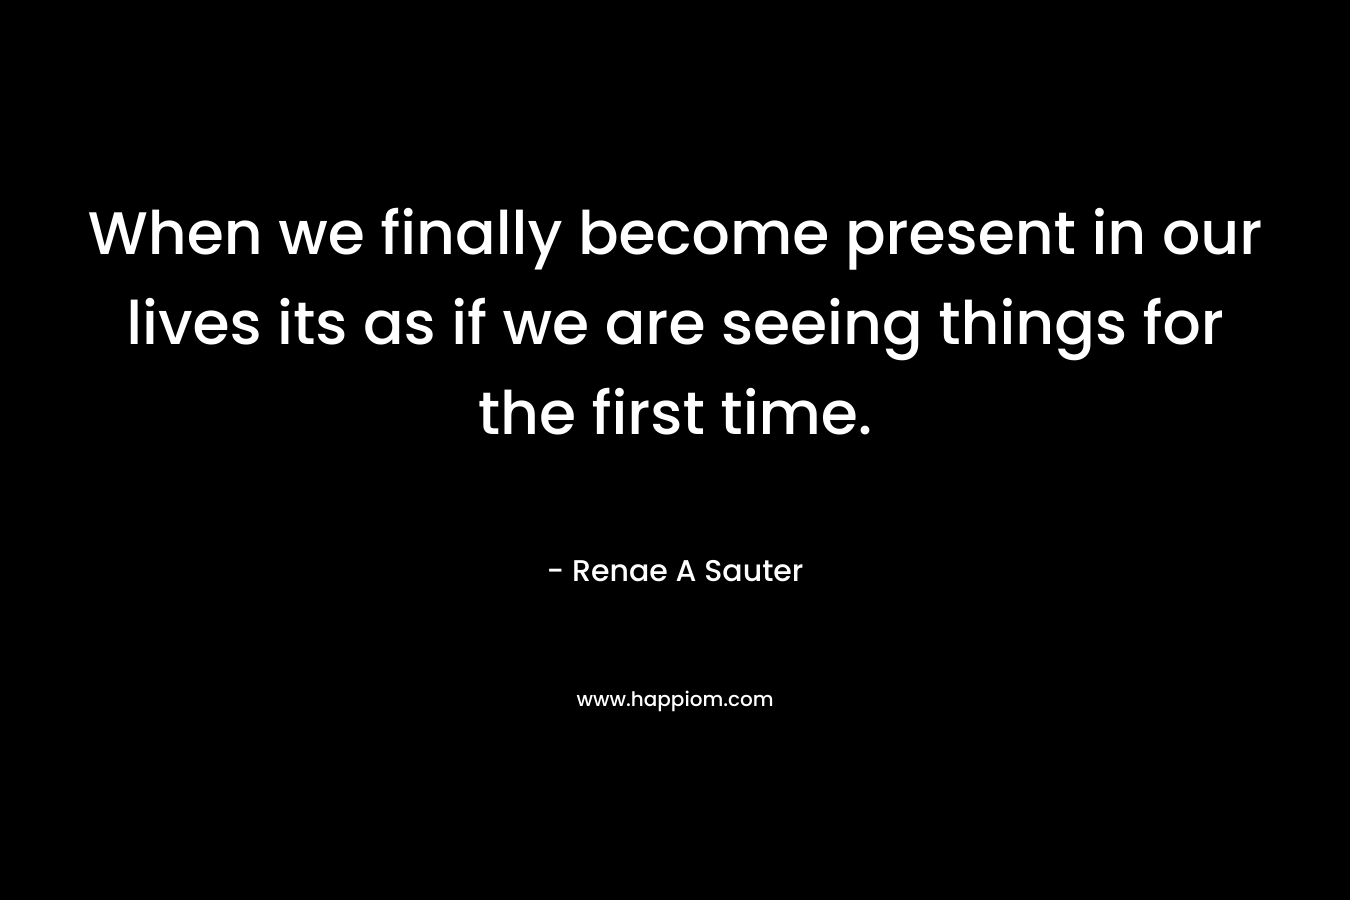 When we finally become present in our lives its as if we are seeing things for the first time.